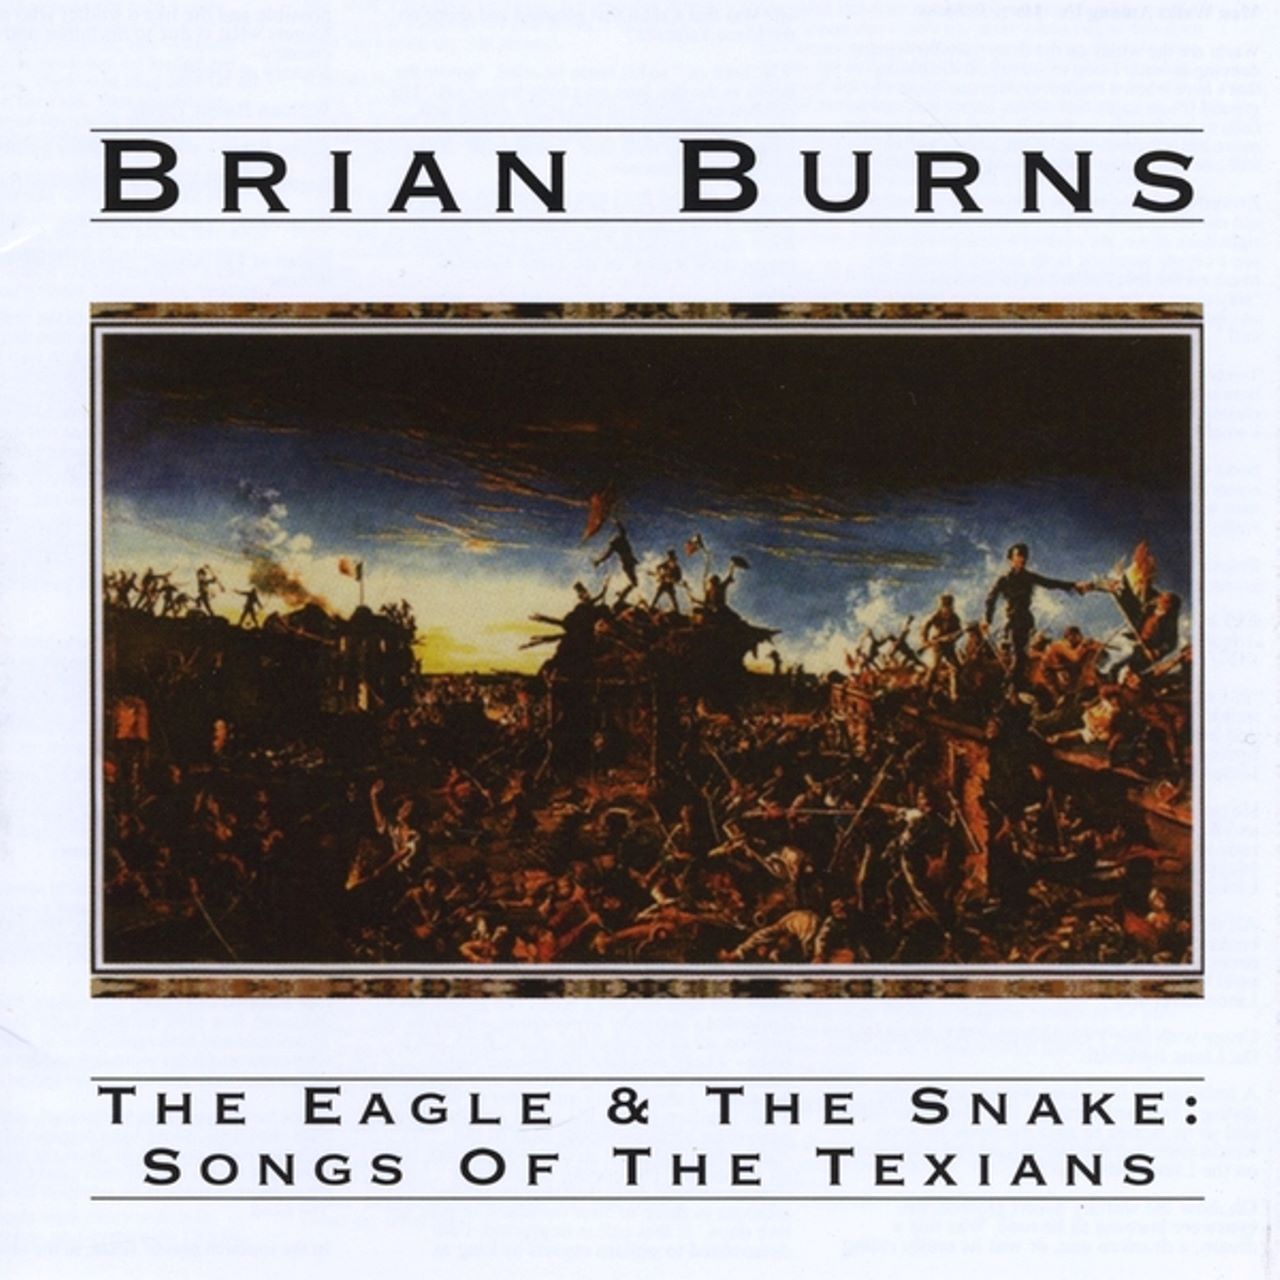 Brian Burns - The Eagle & The Snake - Songs Of The Texians cover album